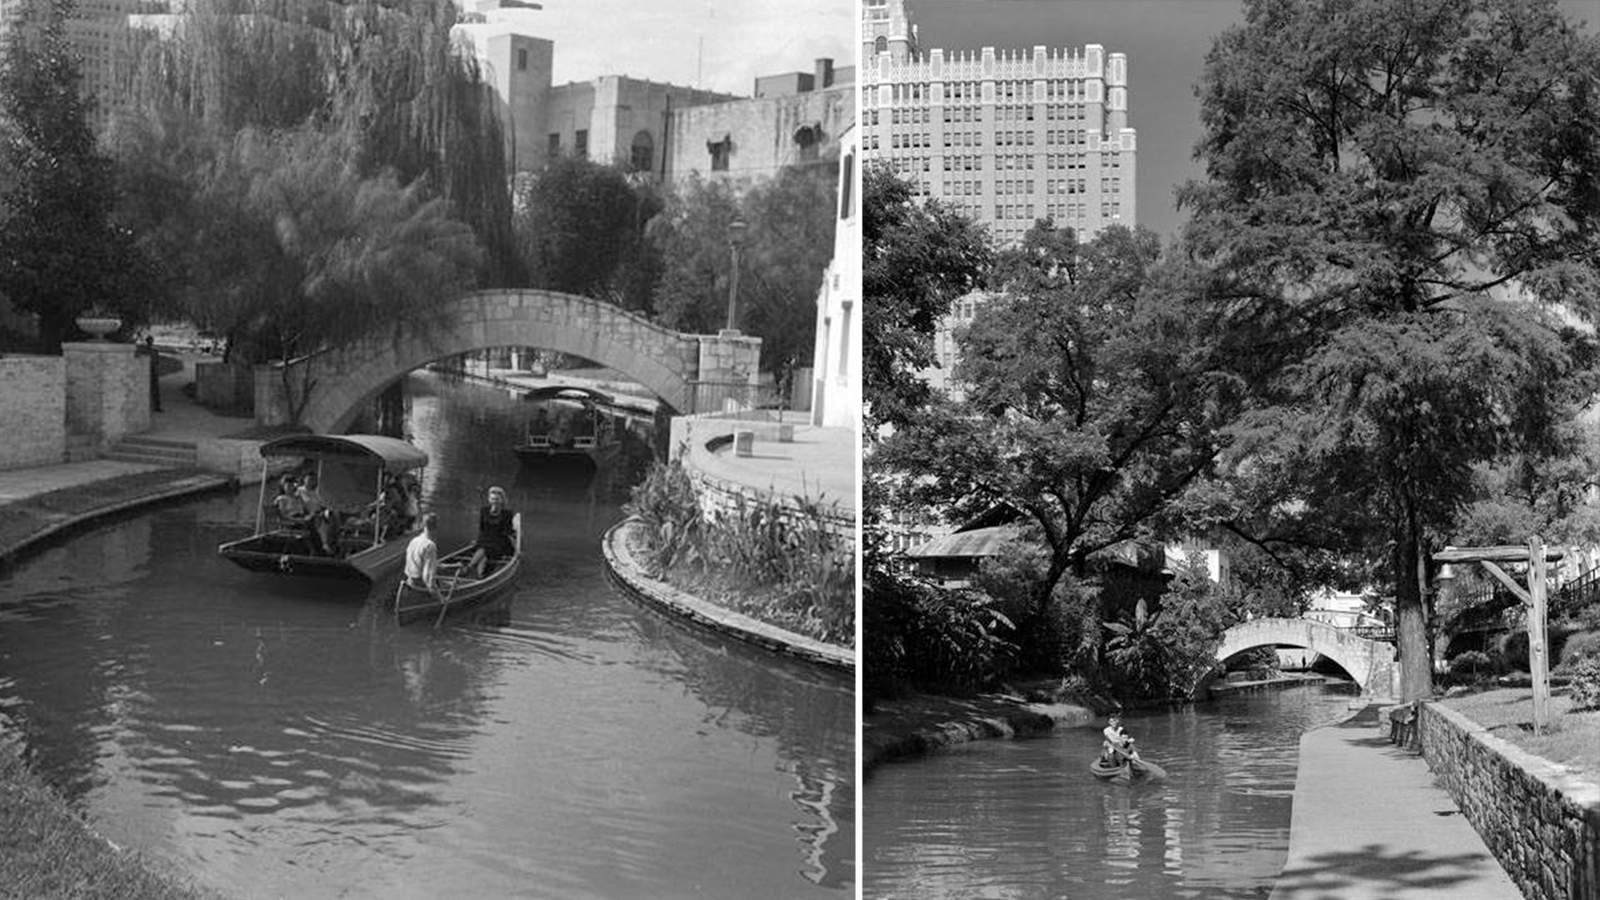 View vintage photos of San Antonians paddling down the San Antonio River Walk in the 1940s